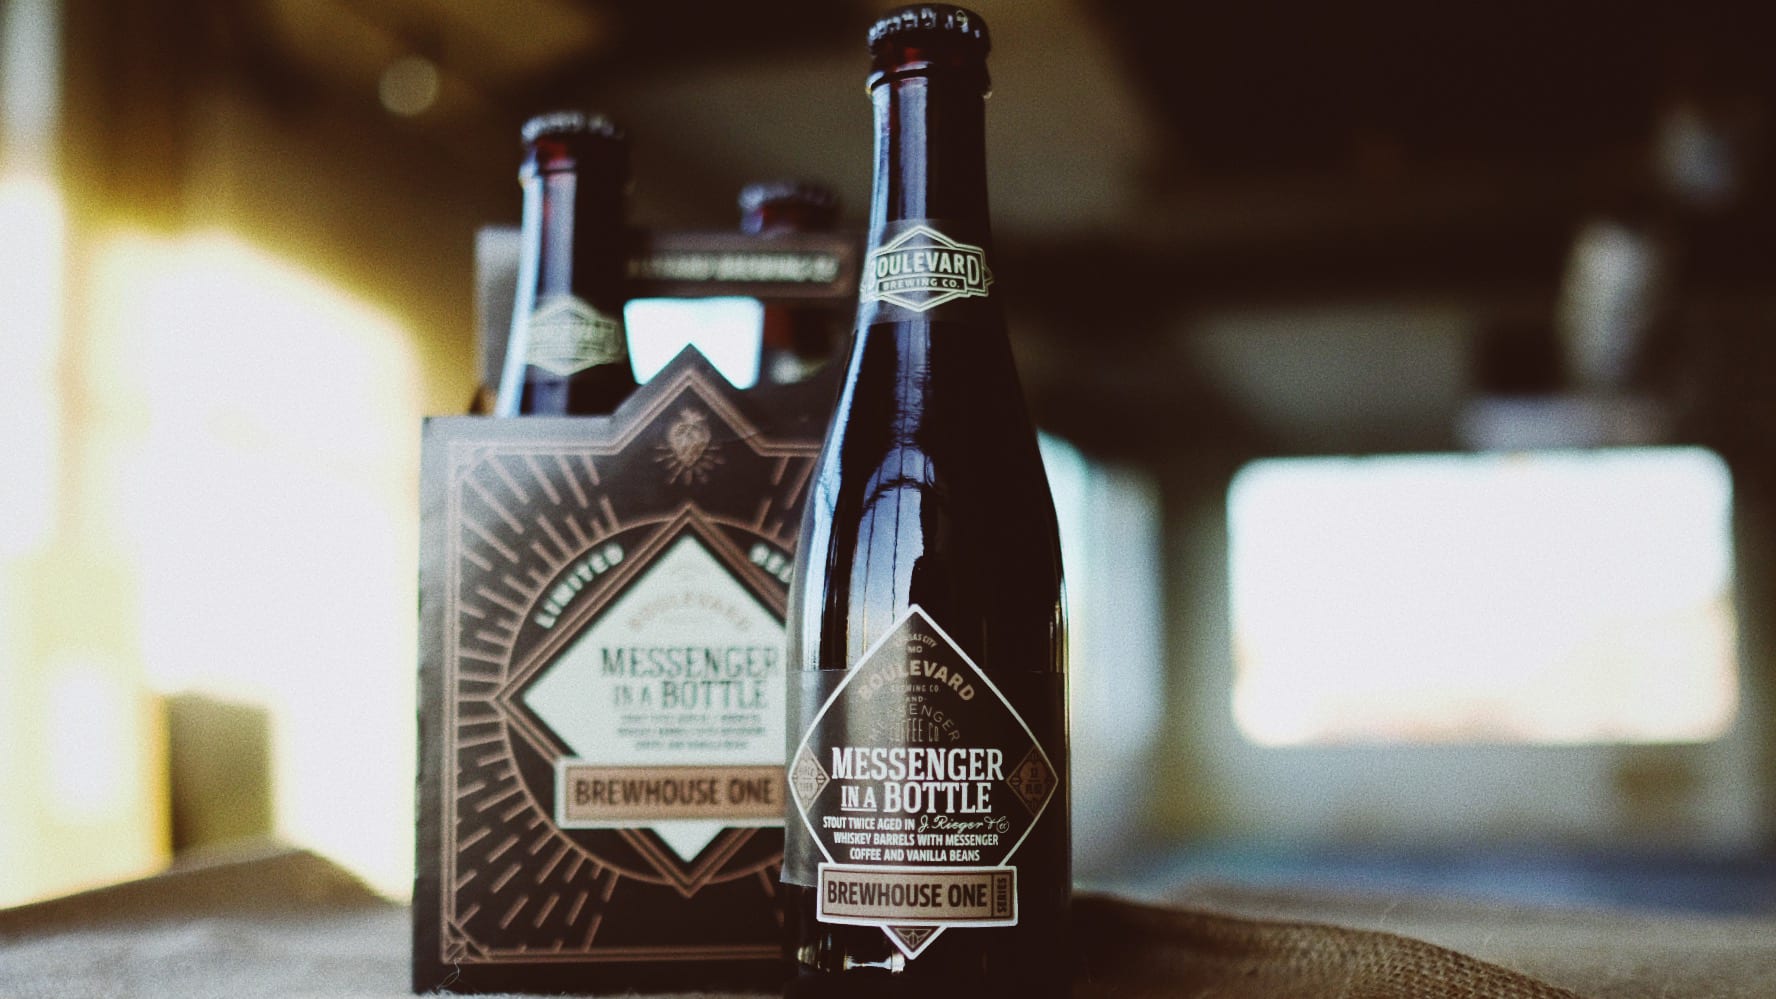 Boulevard Brewing Co. releases Messenger in a Bottle